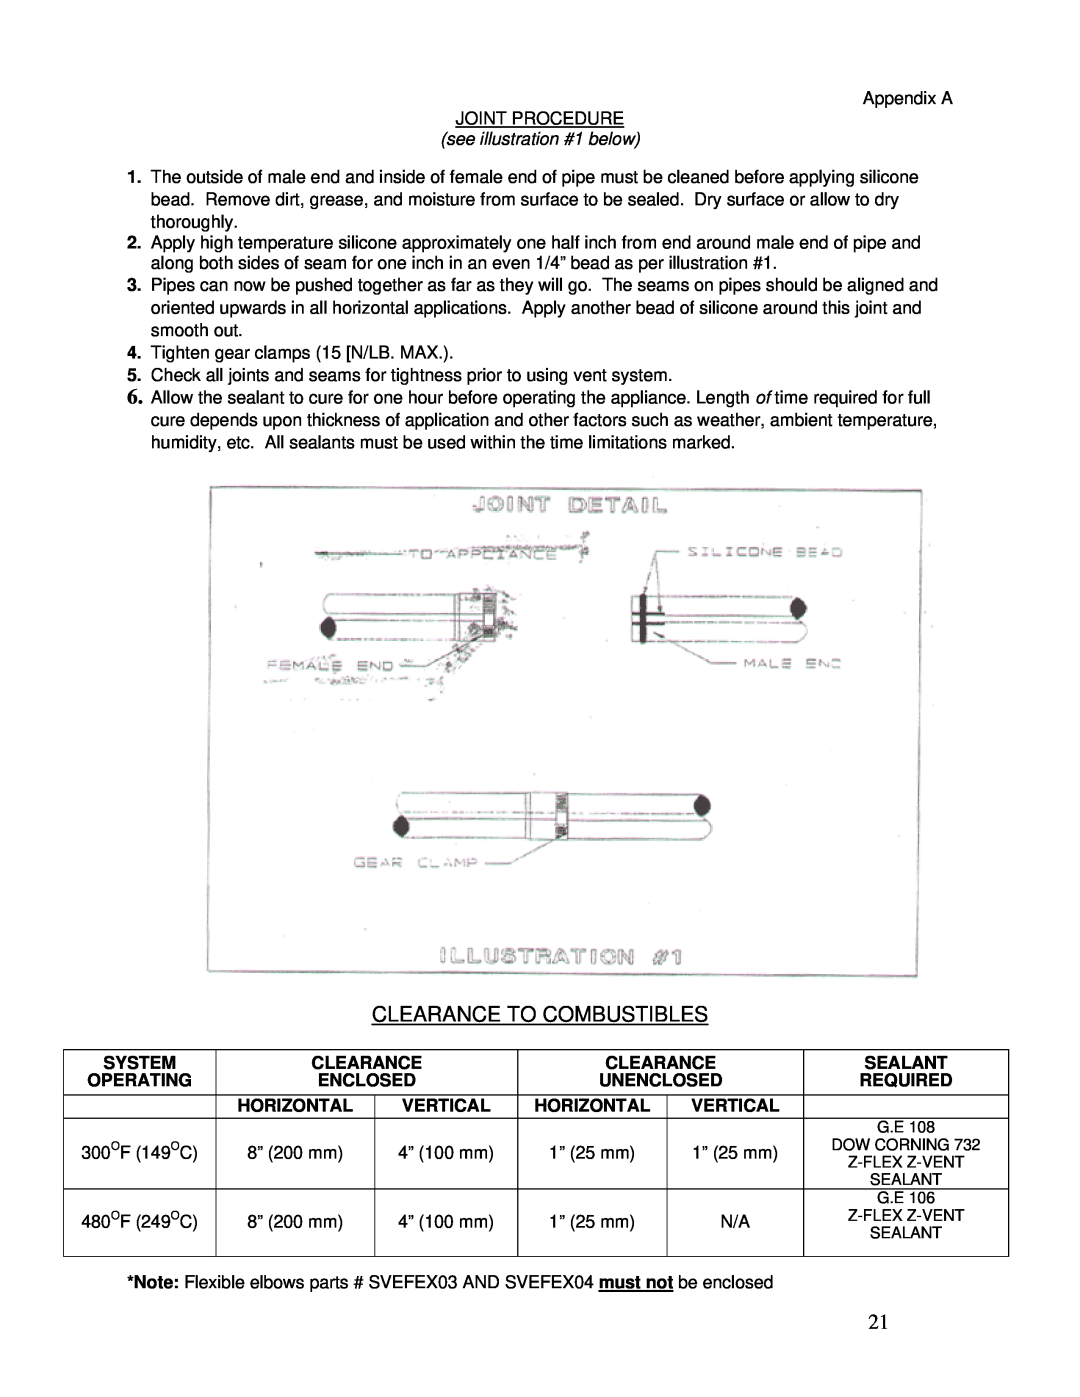 Vanguard Heating PM400, PM200 operation manual Clearance To Combustibles, see illustration #1 below 